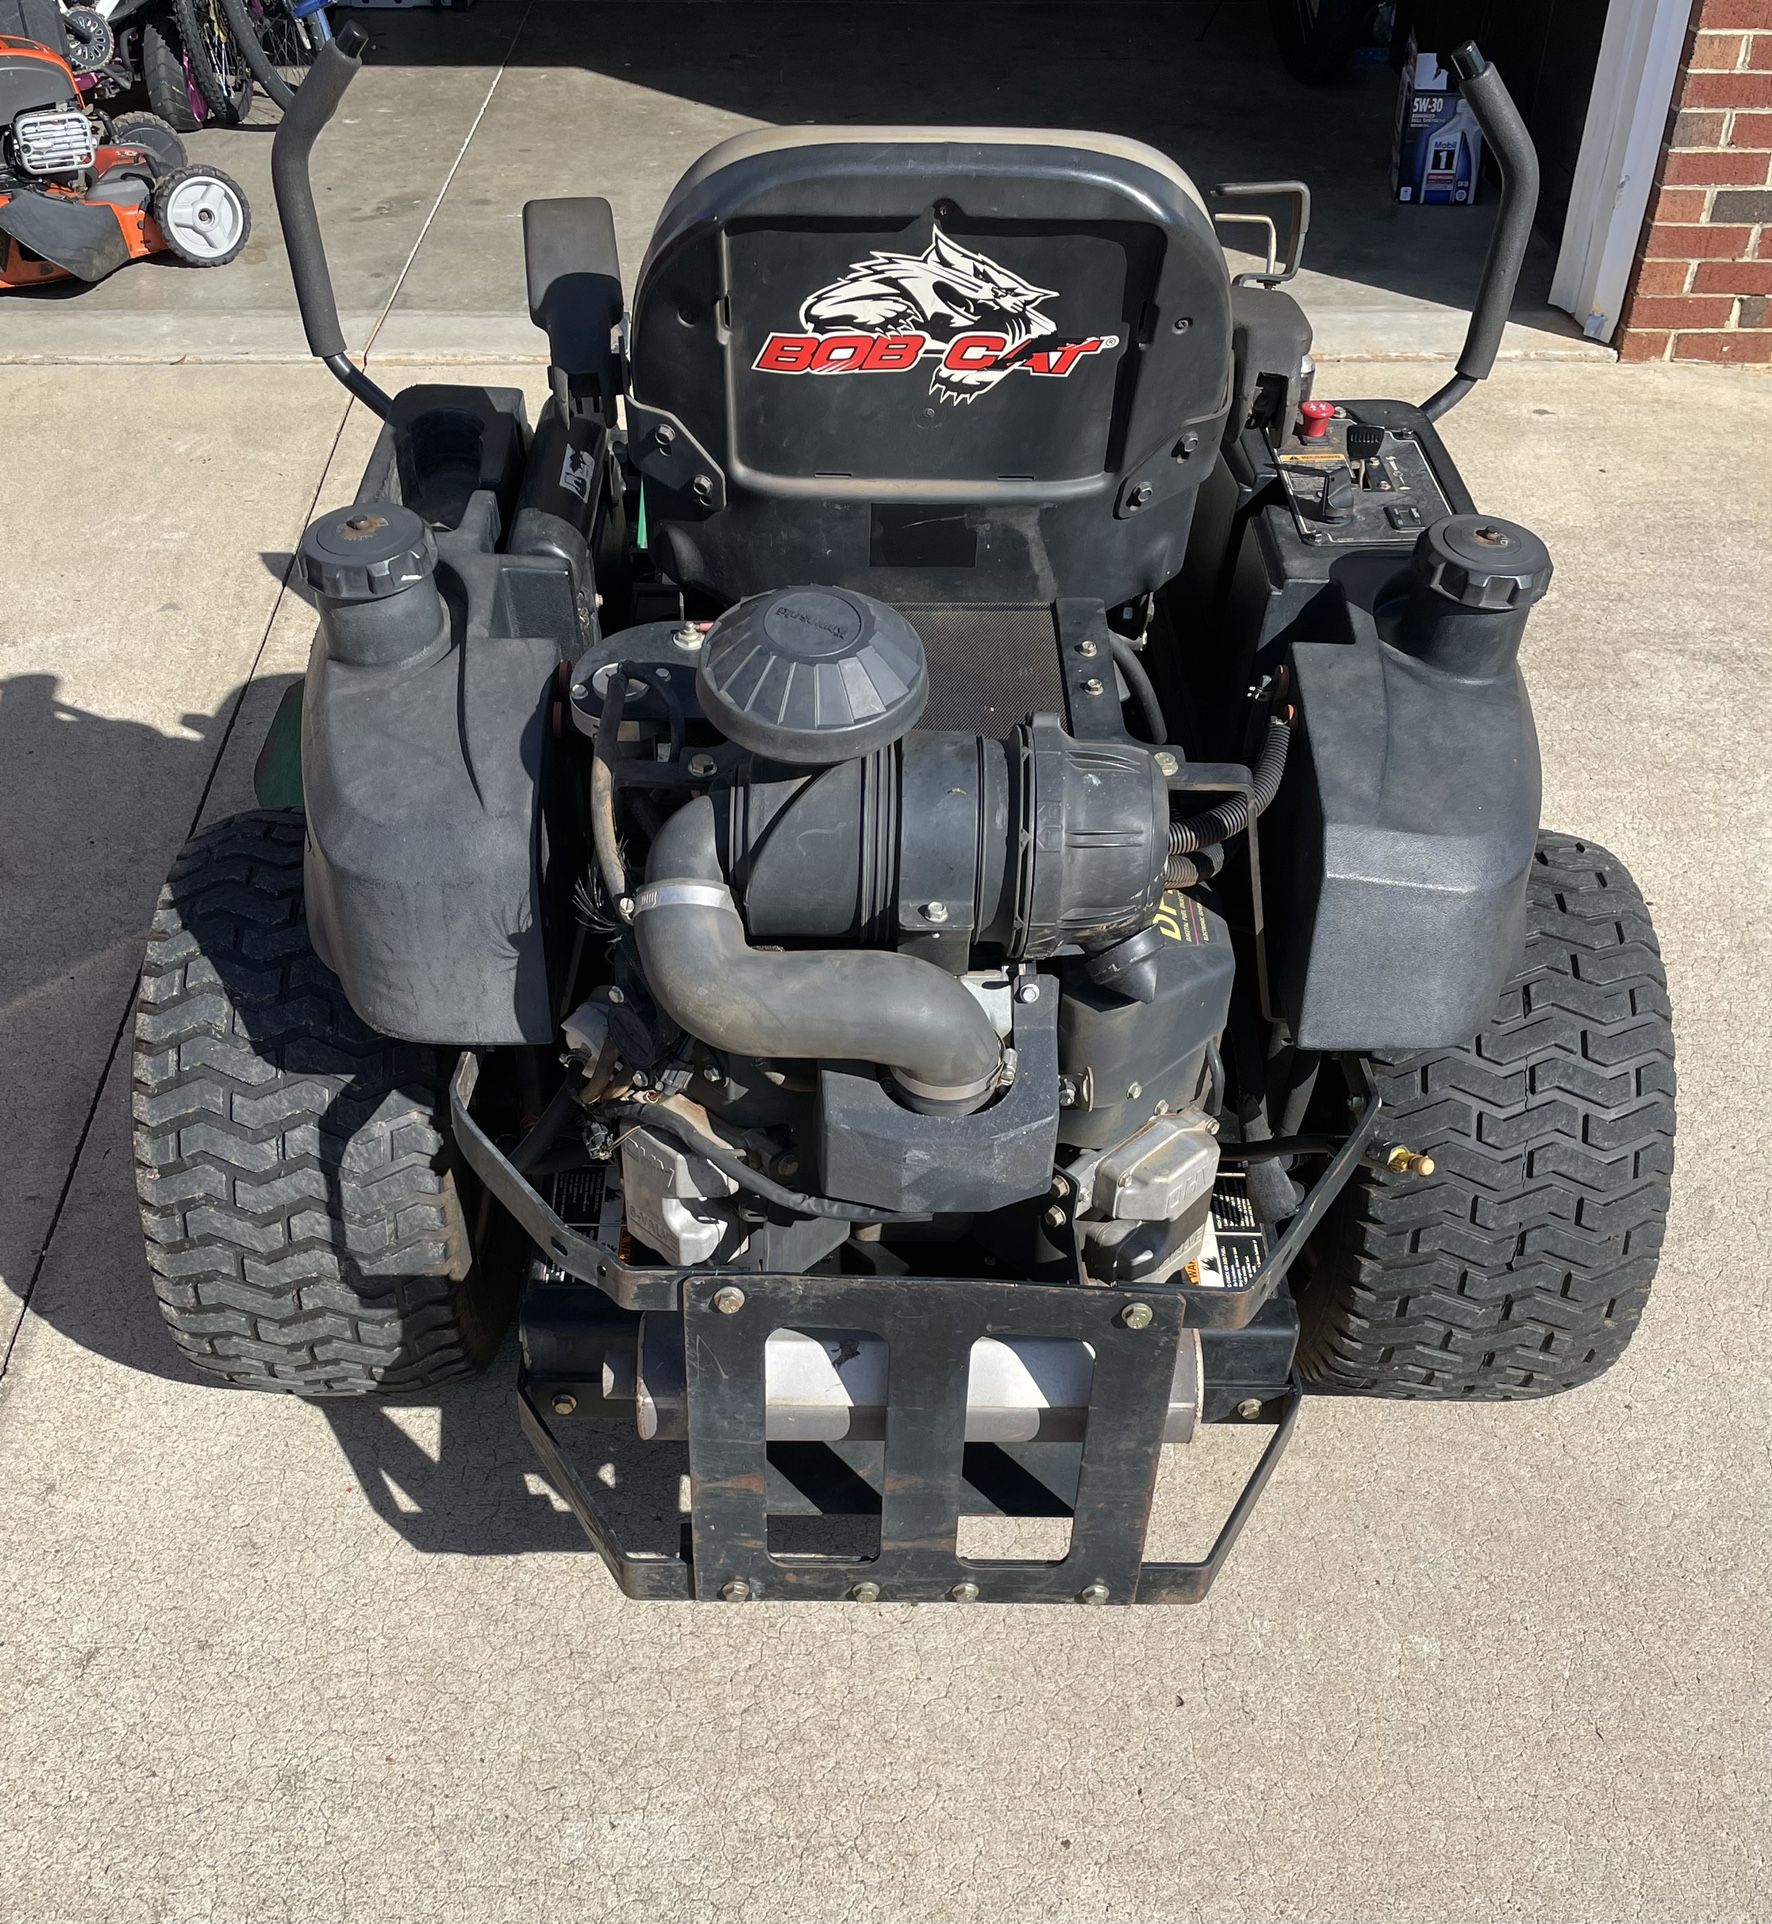 Bobcat mowers 2014 hours 1081 serial (contact info removed)5 Engine hp 37 DFI